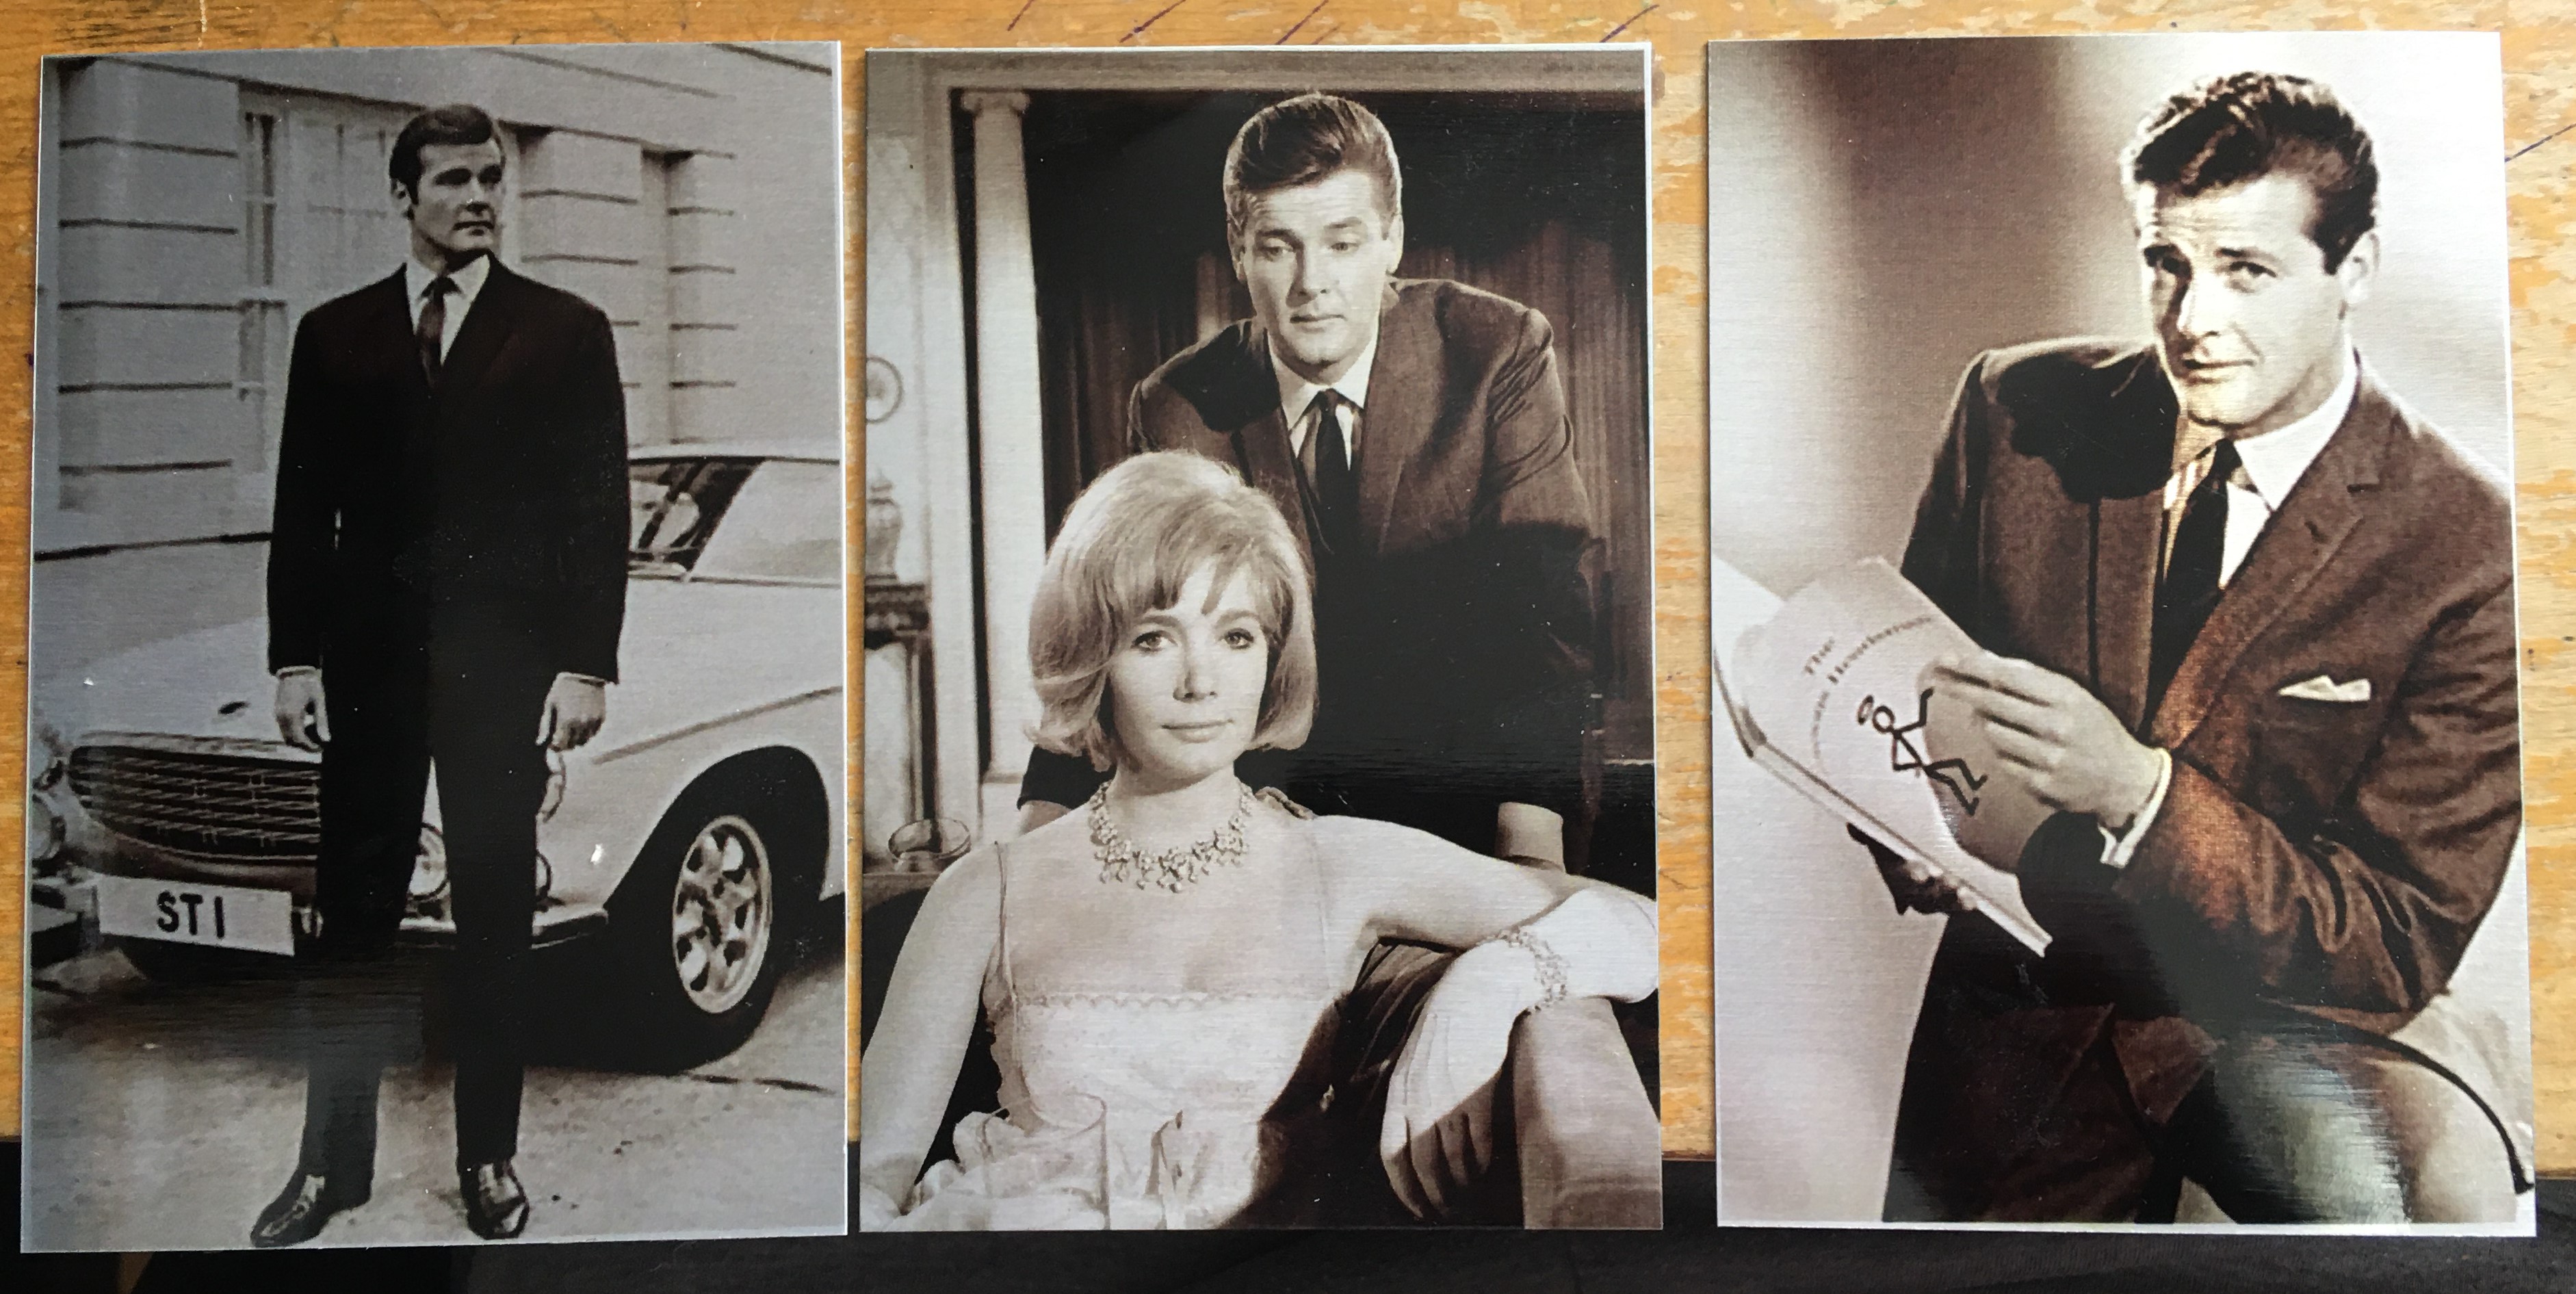 Autographed Card by Legend Roger Moore with 3- 6" x 4" metal Images - Image 3 of 3